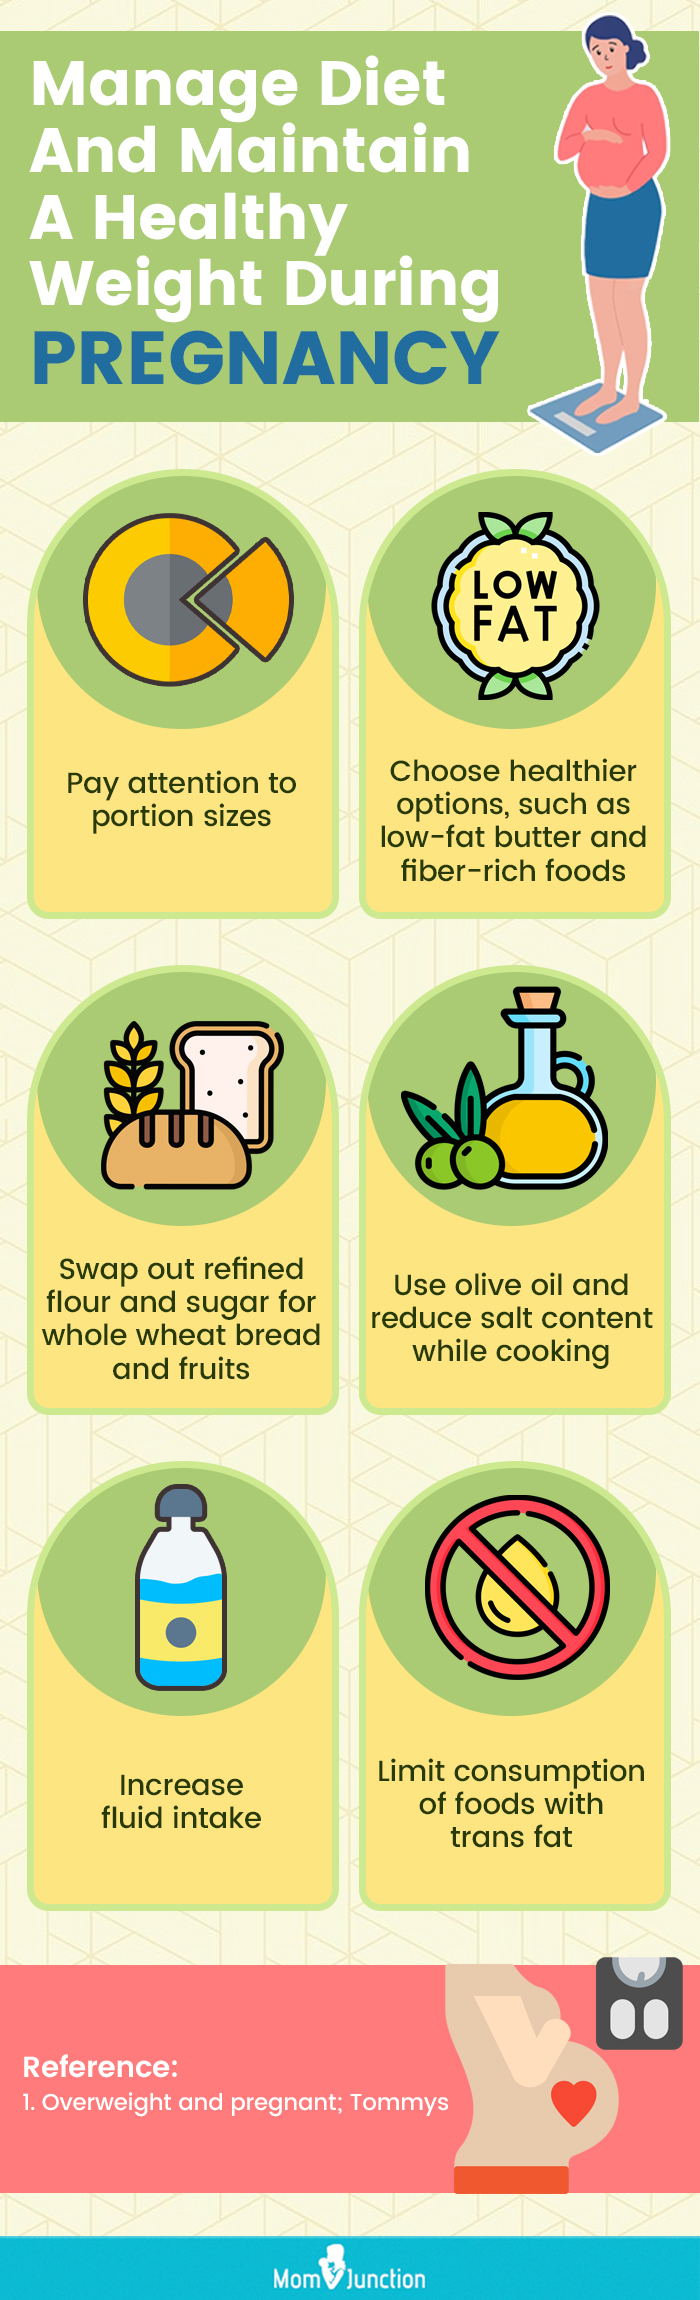 manage diet and maintain a healthy weight during pregnancy (infographic)